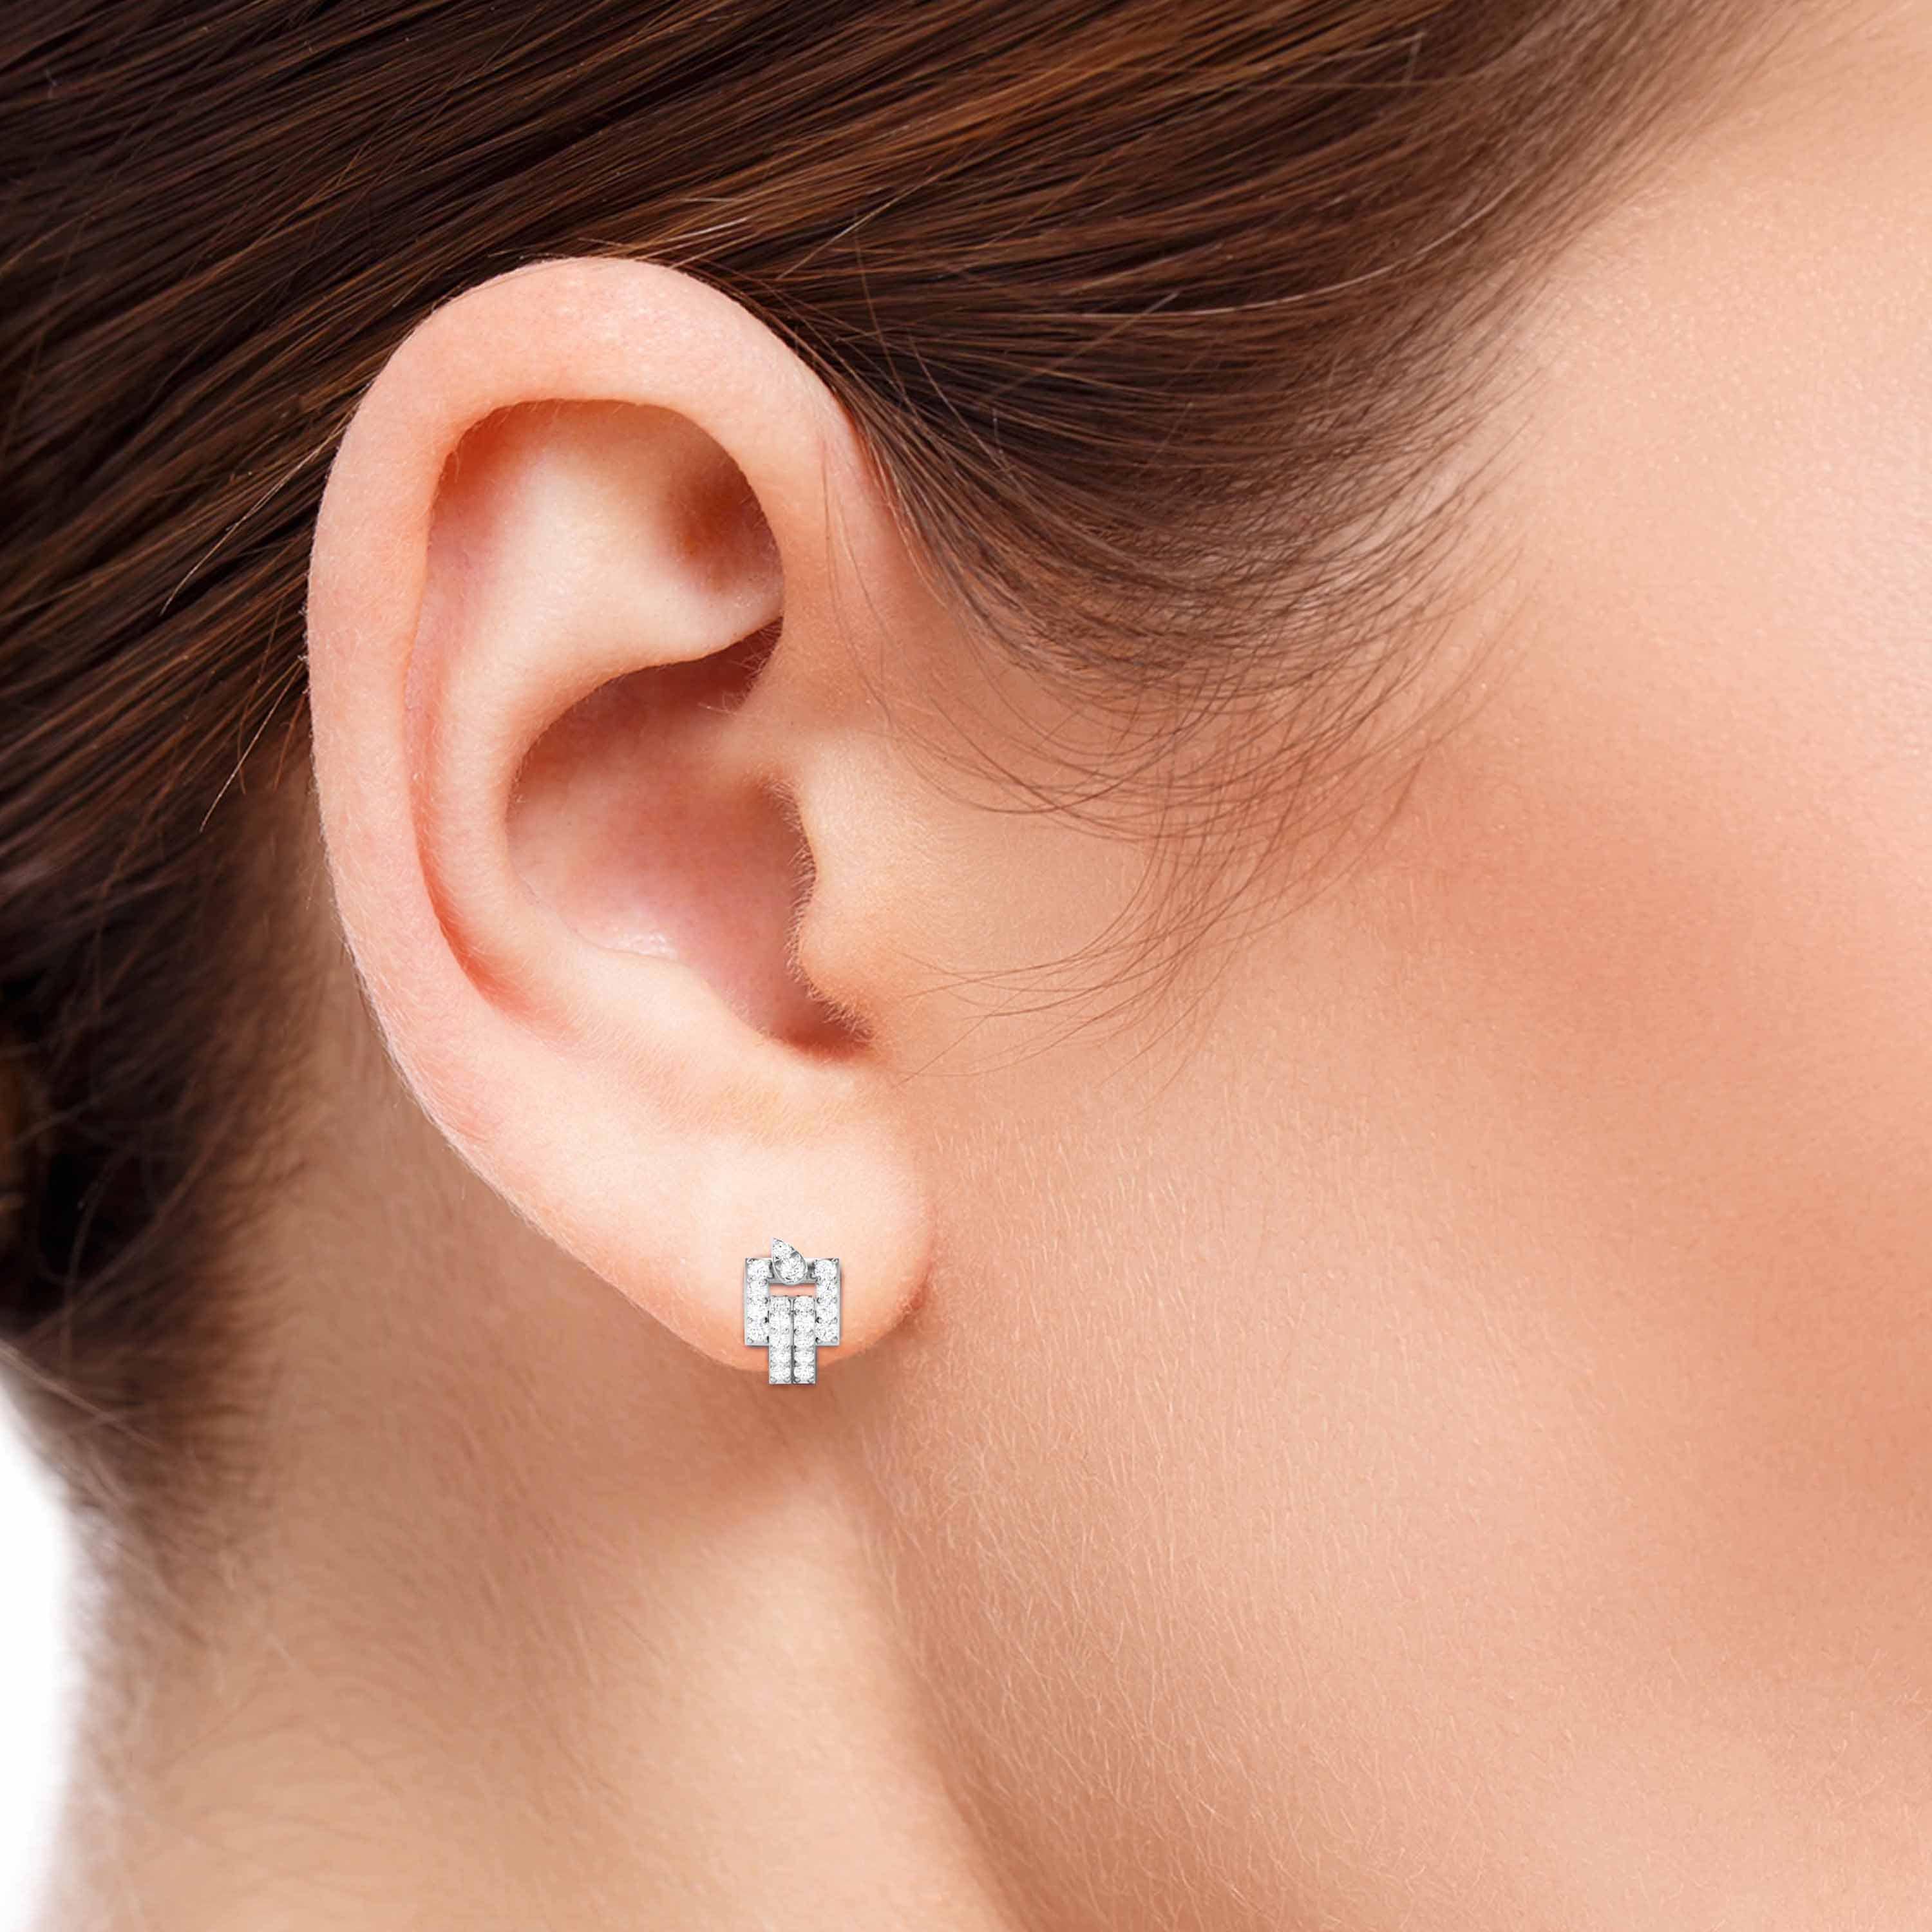 Luxury Princess Crown Stud Earrings With 3A Zircon Stones S925 Silver And  18k Gold Plated, Charming High End Dainty Jewelry Gift For Women From  Songpengchao, $10.4 | DHgate.Com